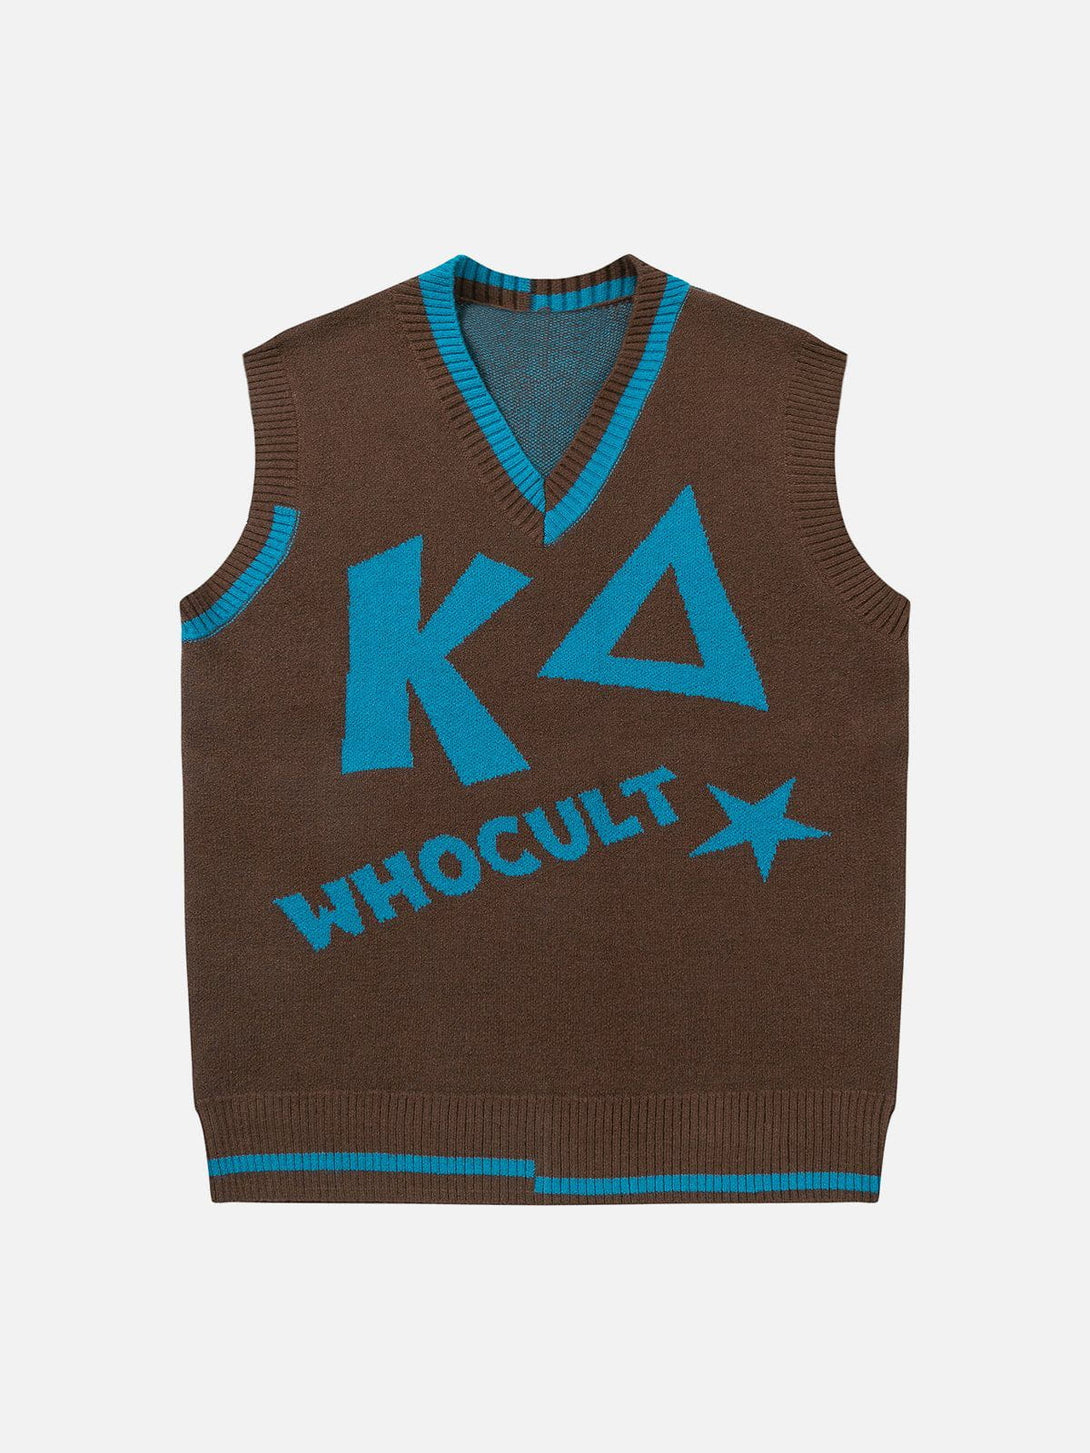 Levefly - WHOCULT Embroidery Sweater Vest - Streetwear Fashion - levefly.com